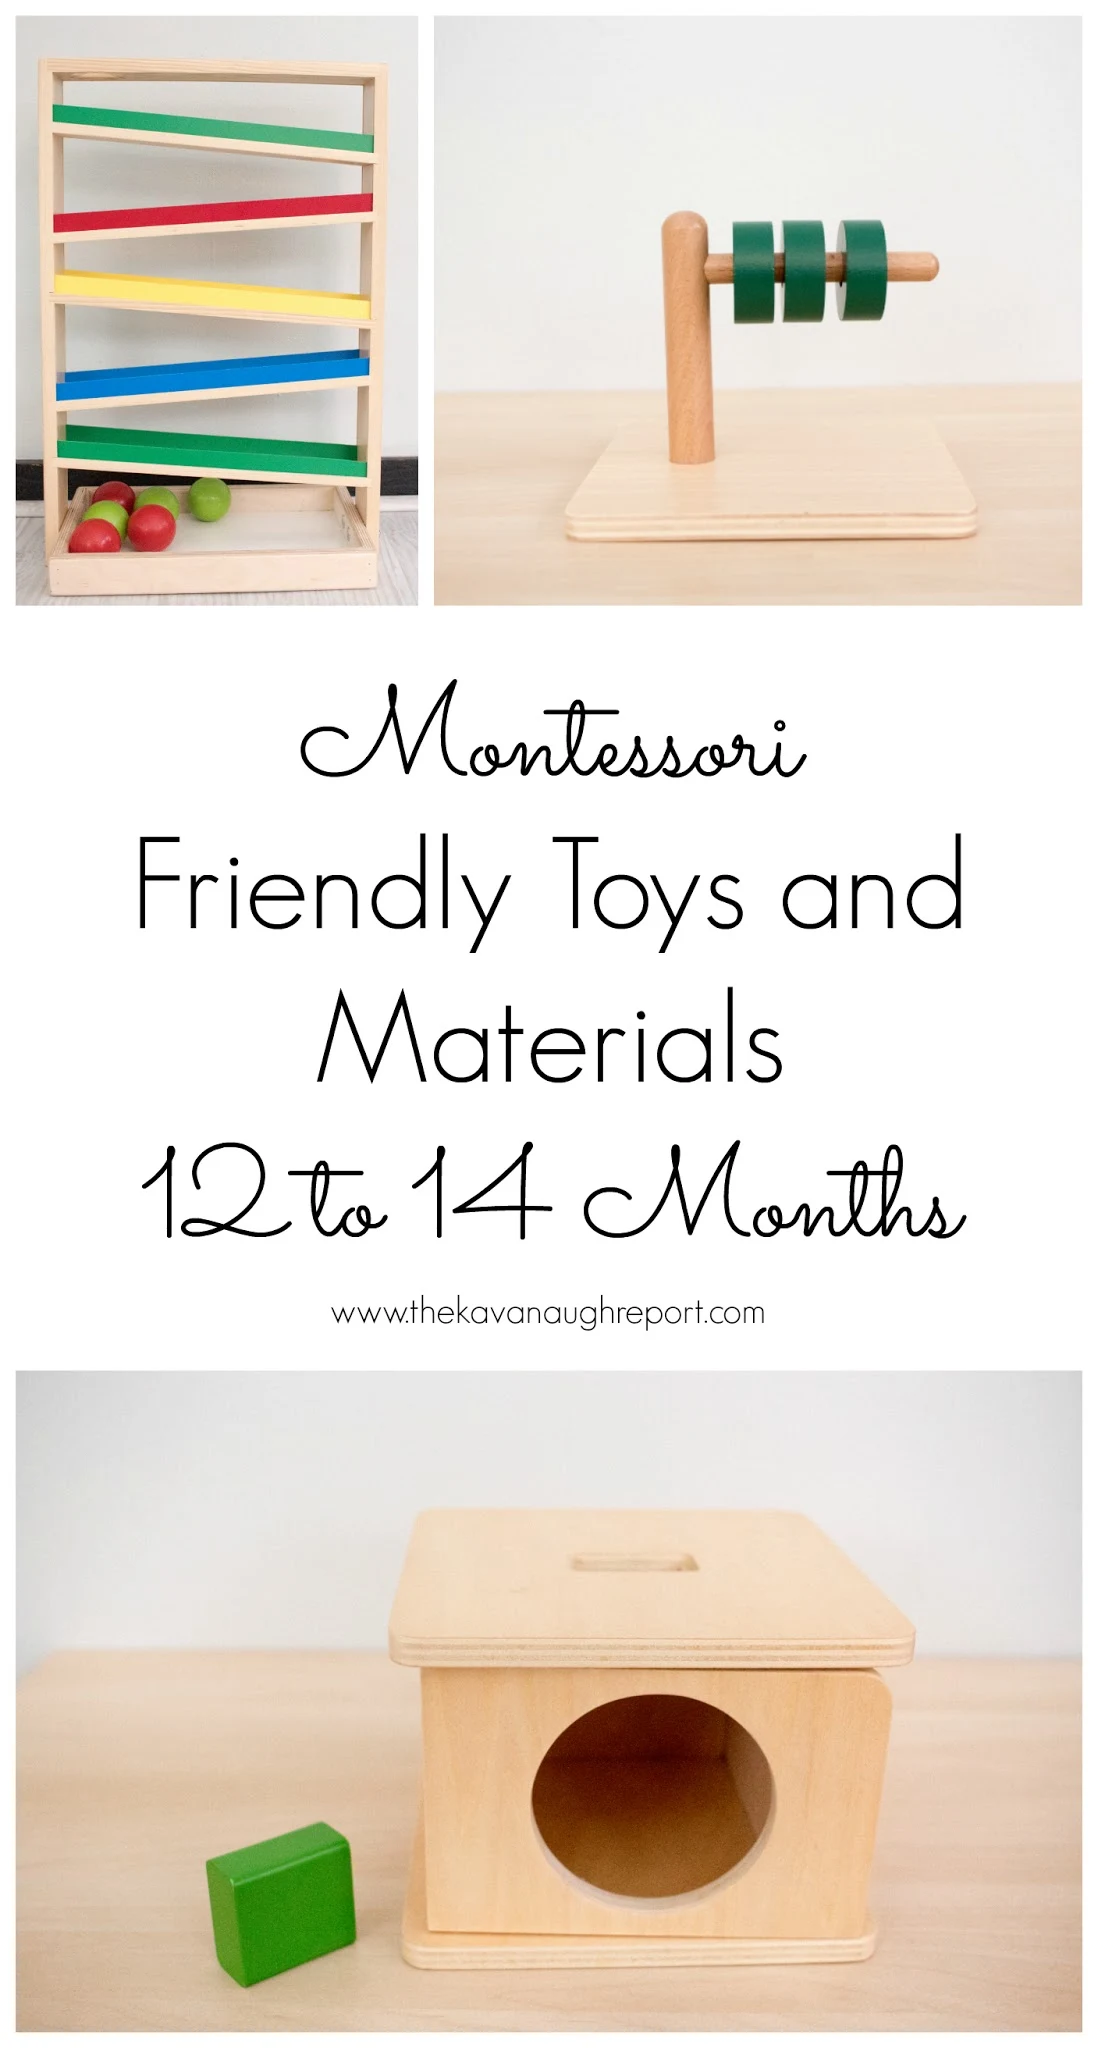 Montessori friendly baby and toddler toys from 12 to 14 months.